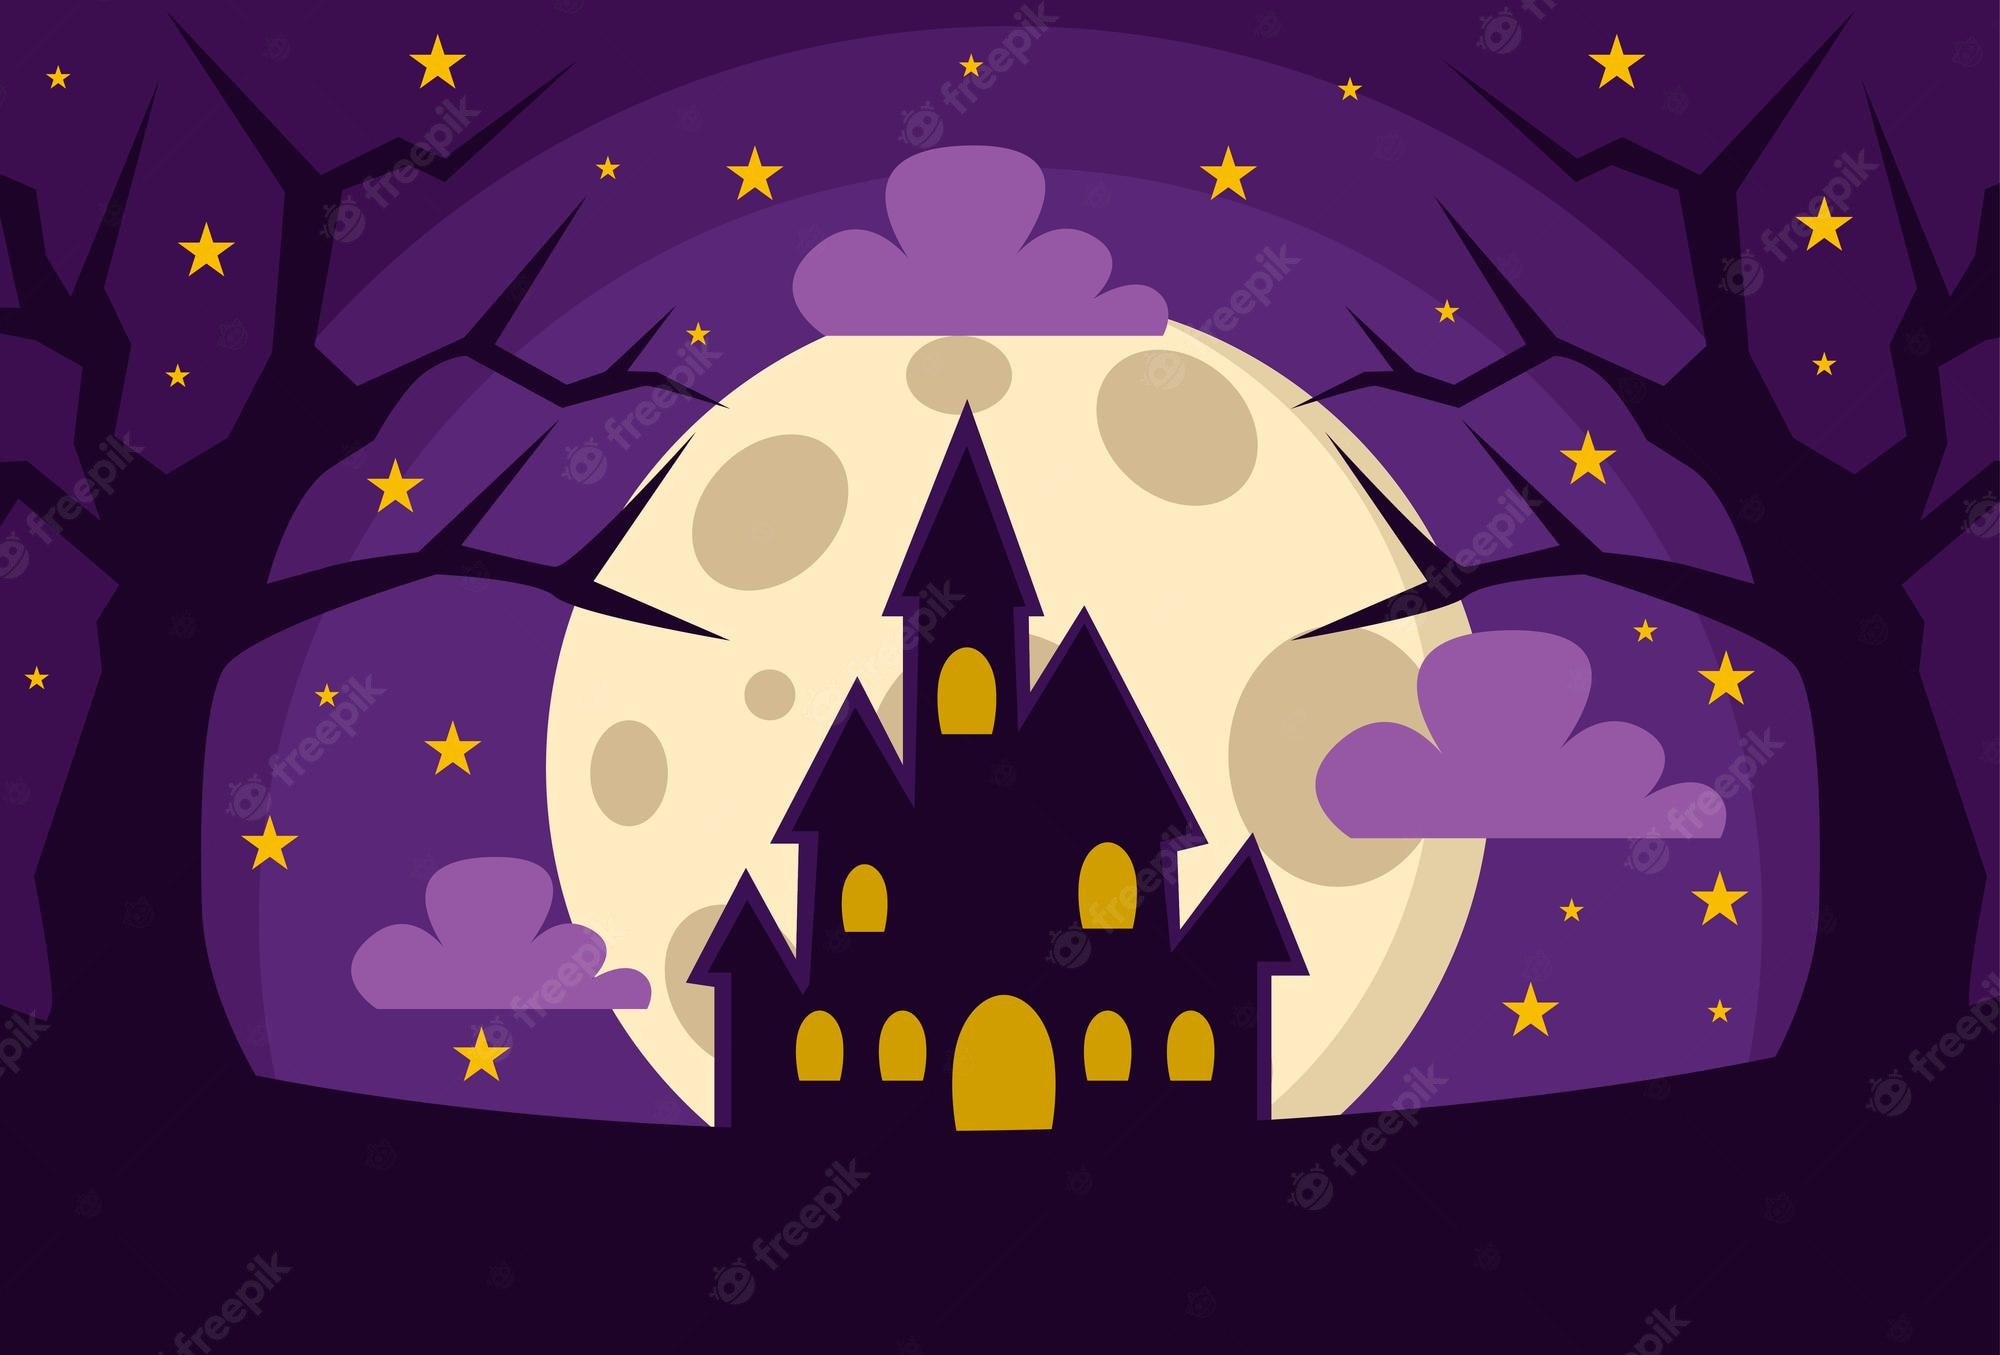 Premium Vector. Happy halloween background design in purple color for covers banners and more